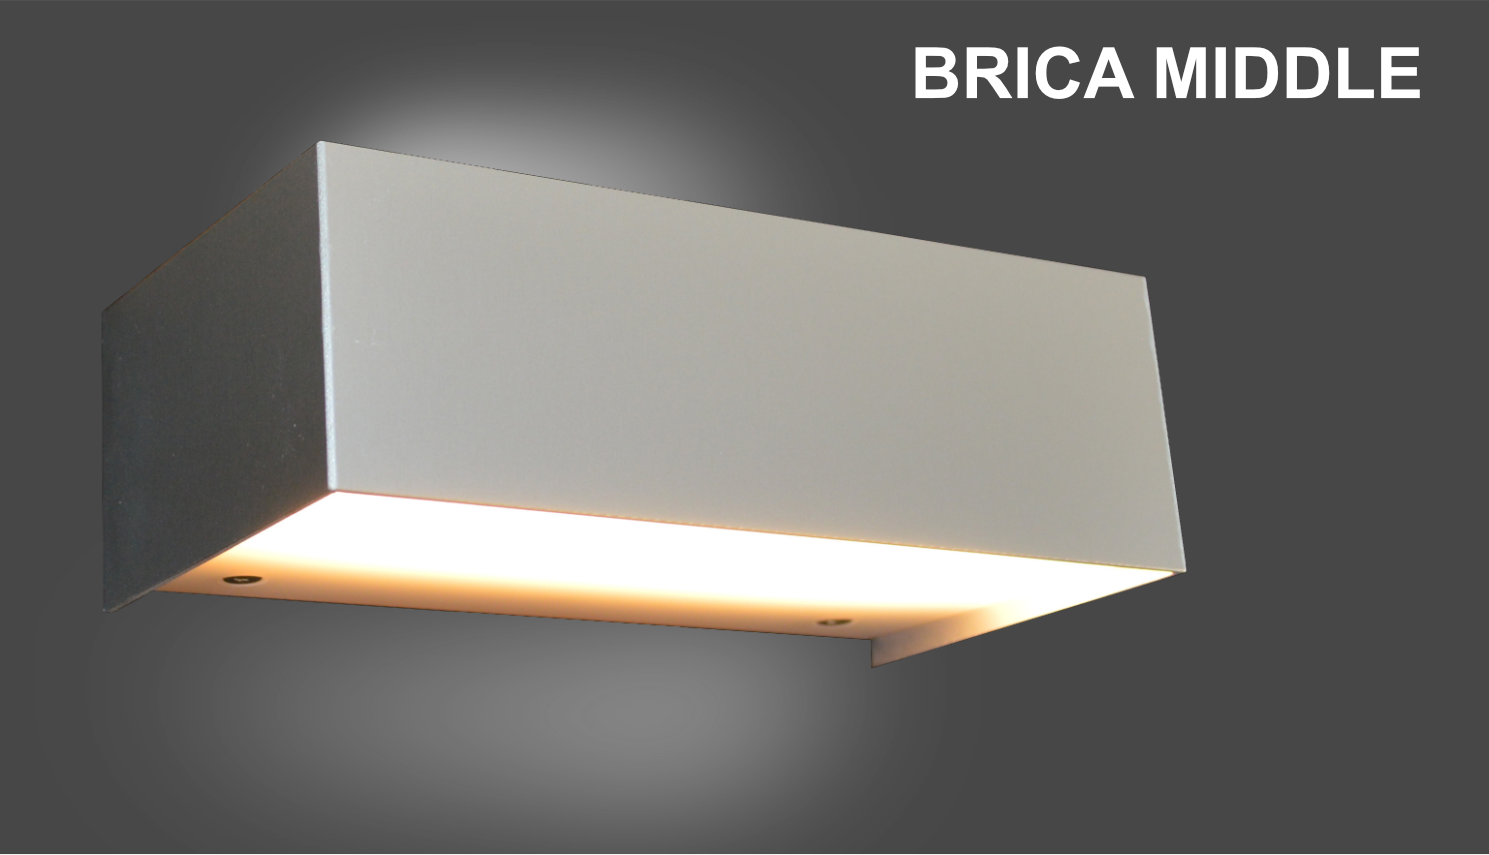 BRICA MIDDLE